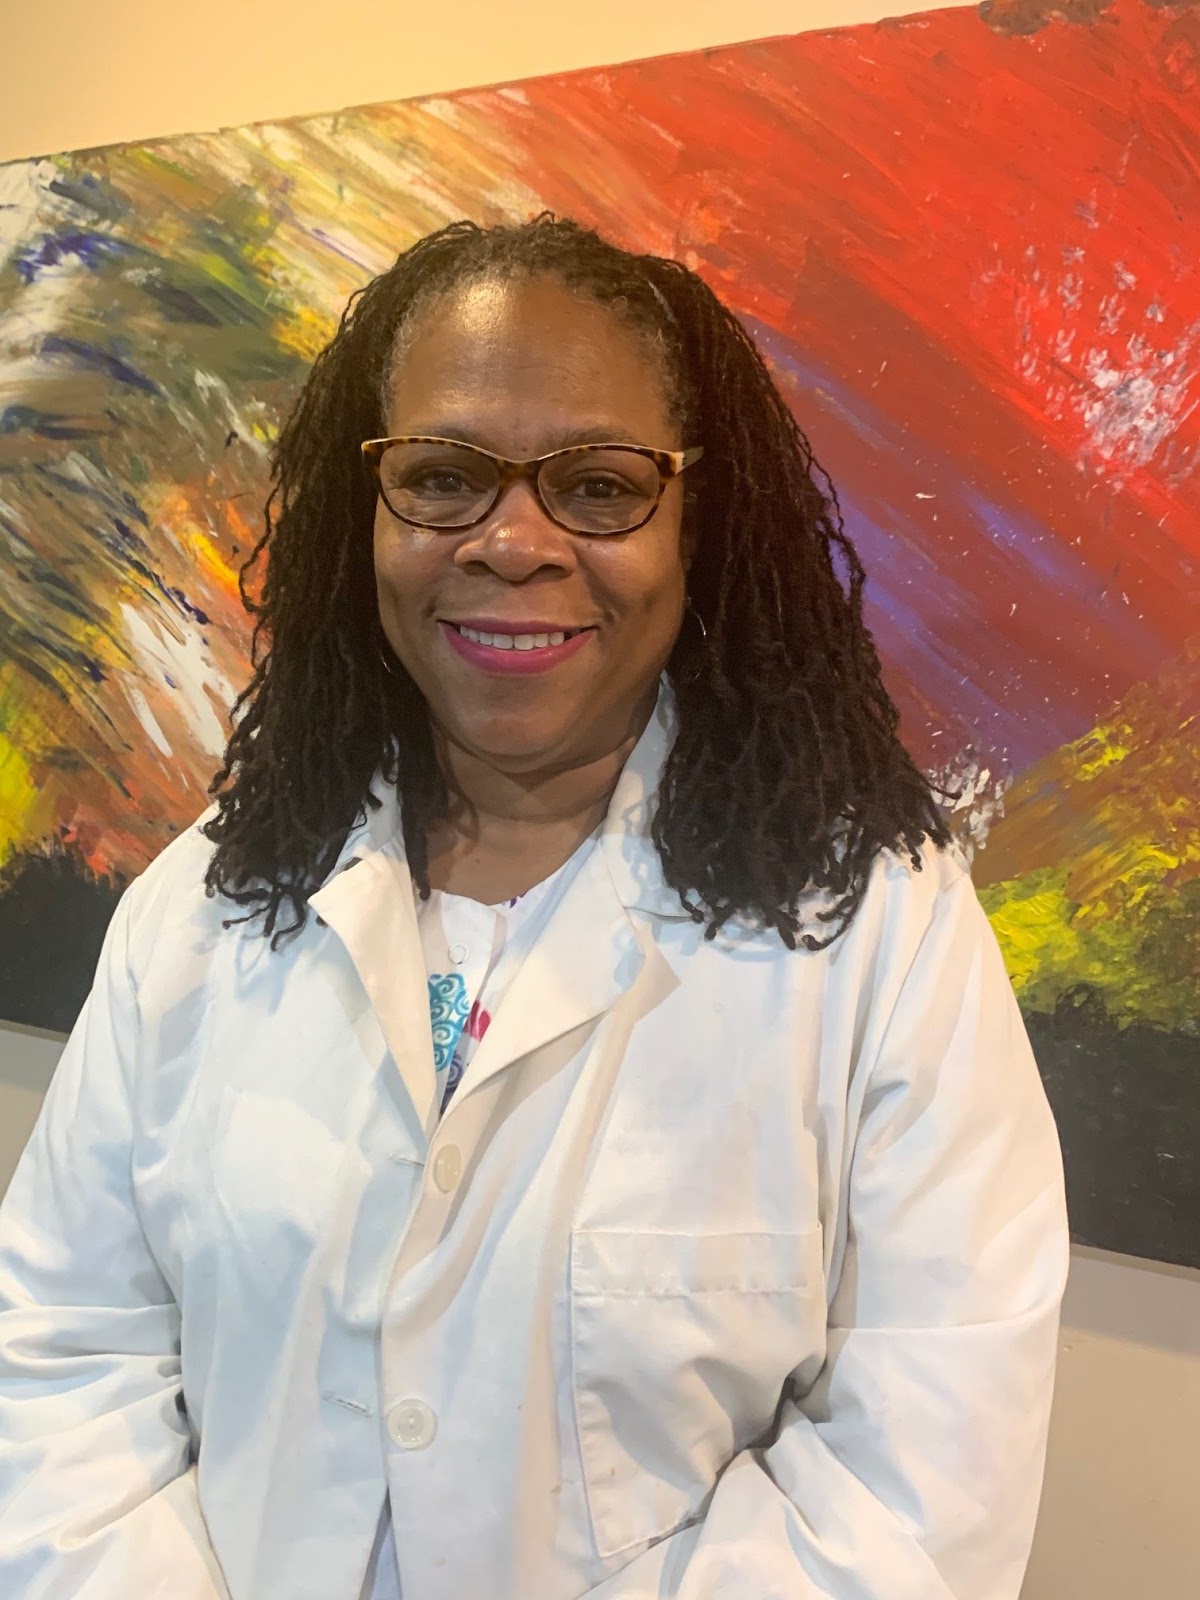 Dr. Butler in a white coat with a colorful painting in the background